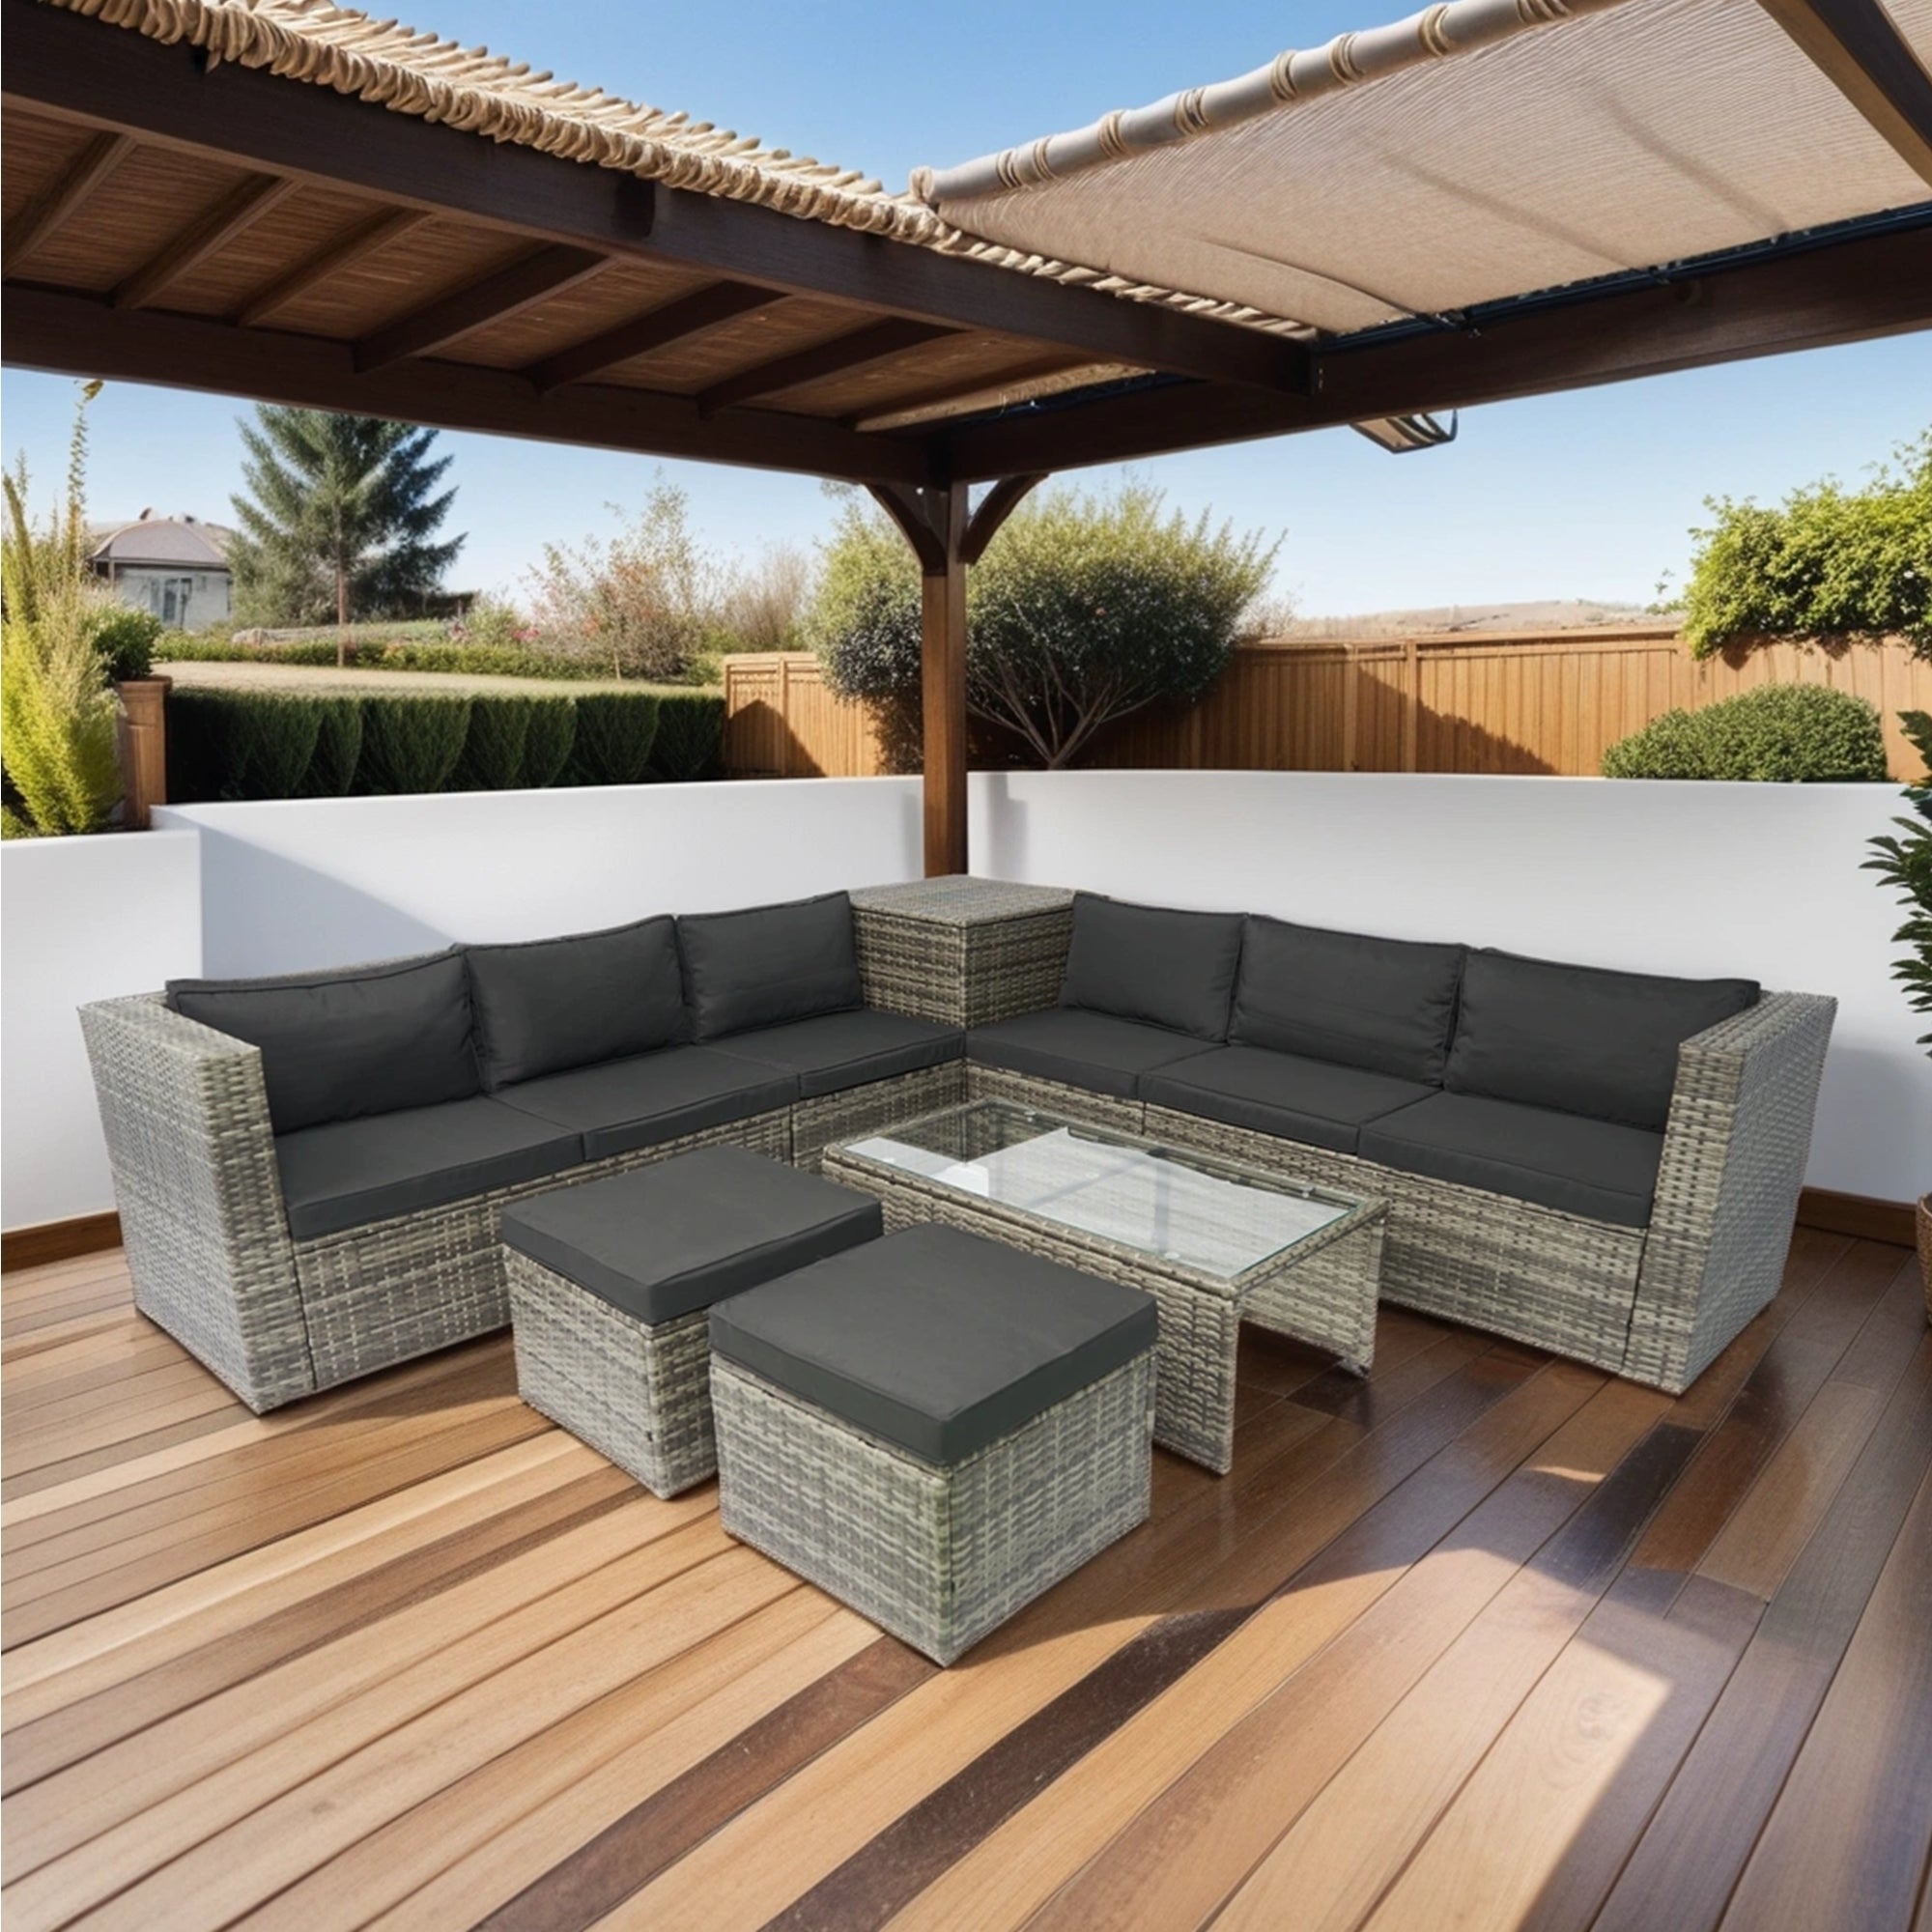 🆓🚛 8 Piece Patio Sectional Wicker Rattan Outdoor Furniture Sofa Set With 1 Storage Box Under Seat and Cushion Box Gray Wicker + Black Cushion + Clear Glass Top